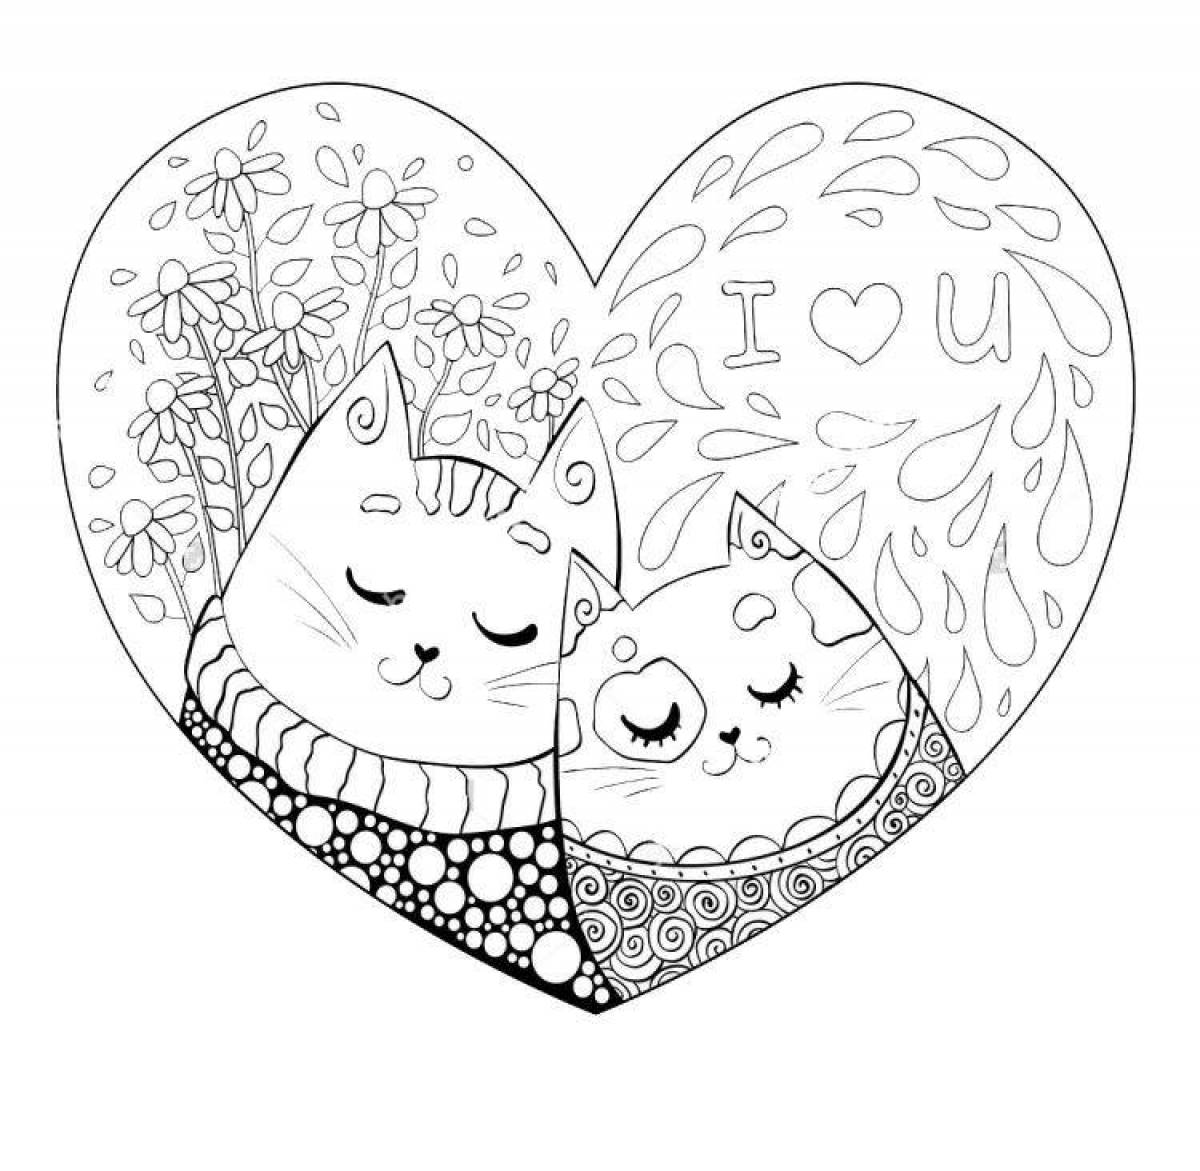 Adorable cat with heart coloring book